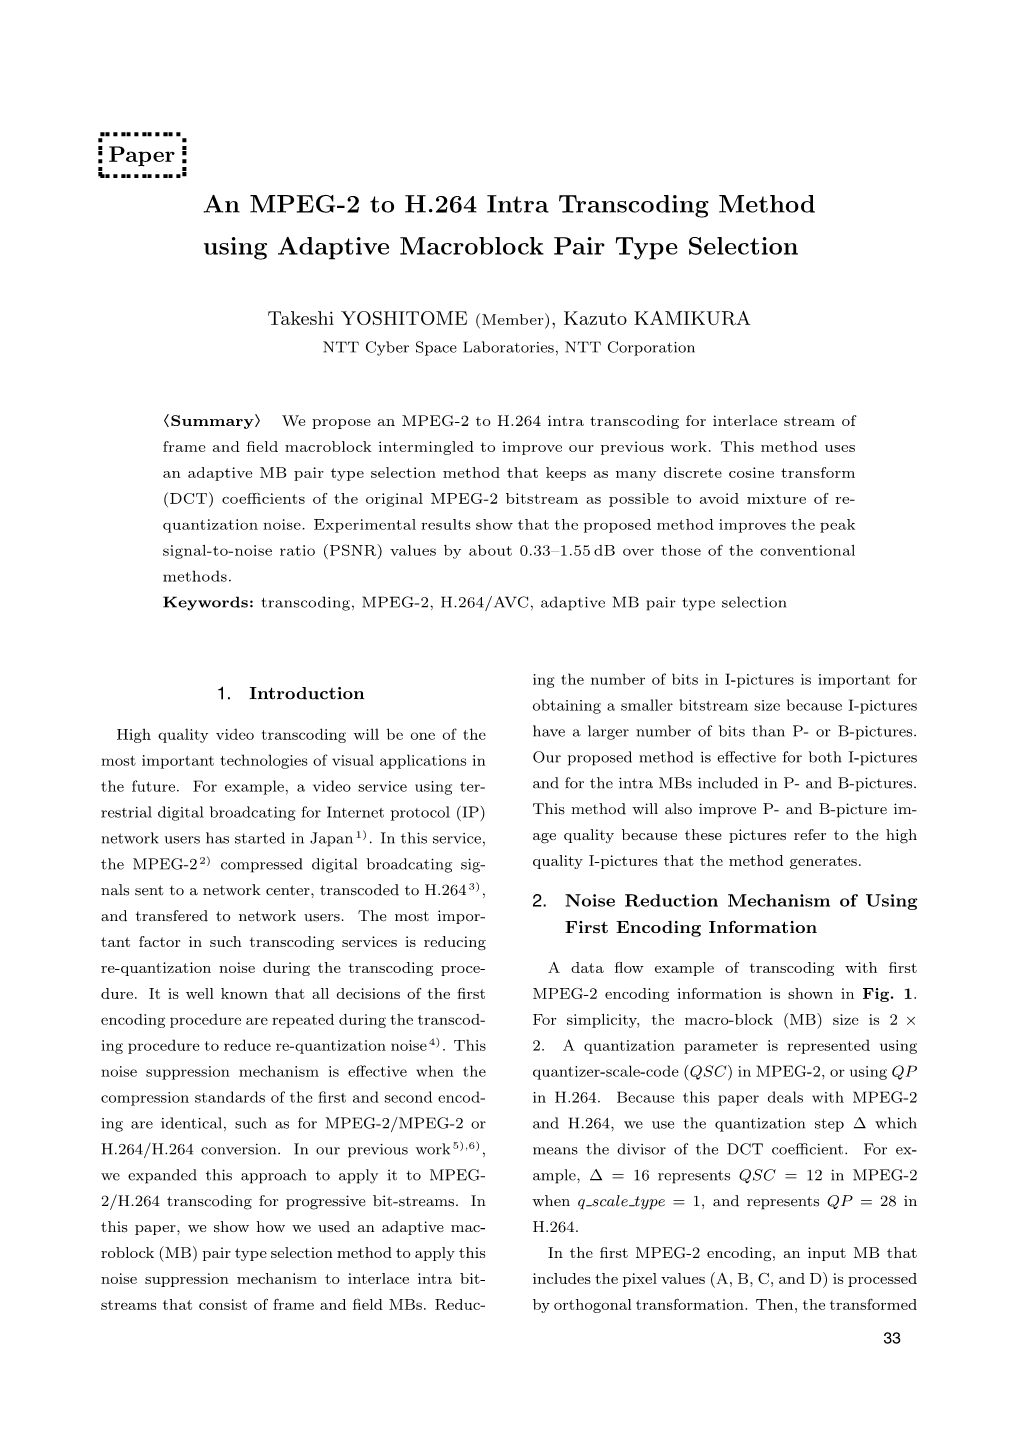 An MPEG-2 to H.264 Intra Transcoding Method Using Adaptive Macroblock Pair Type Selection